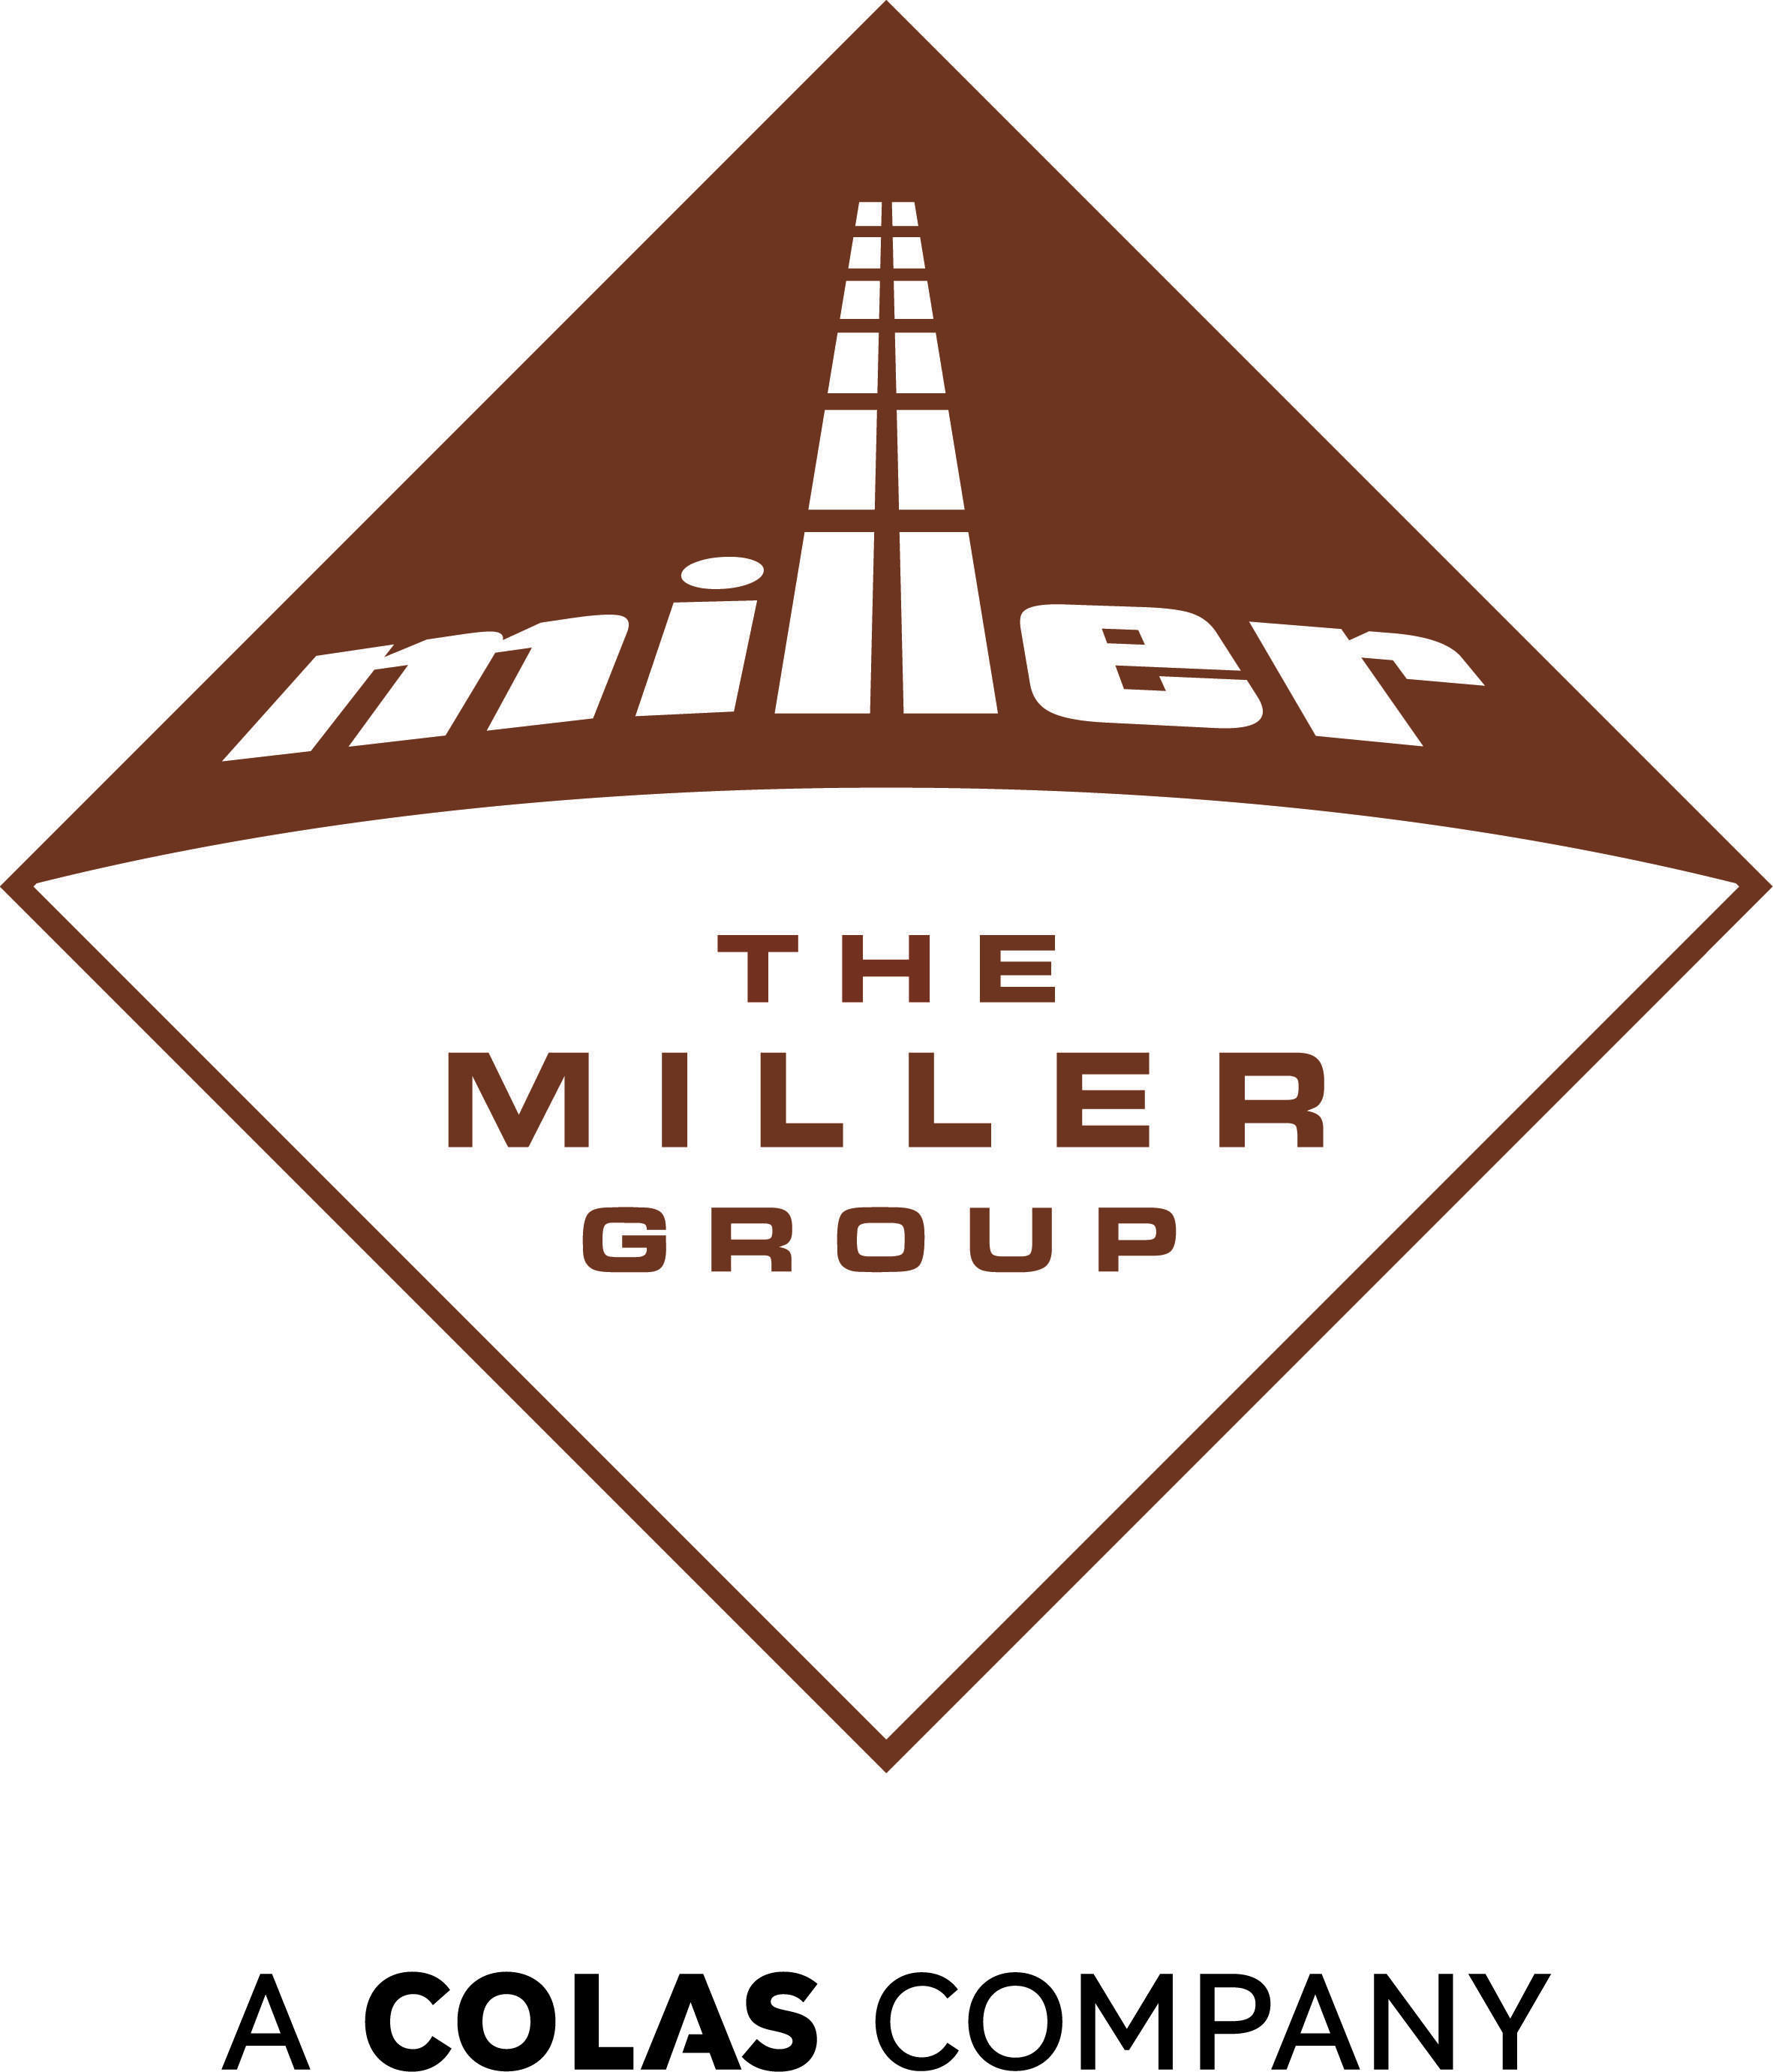 The Miller Group